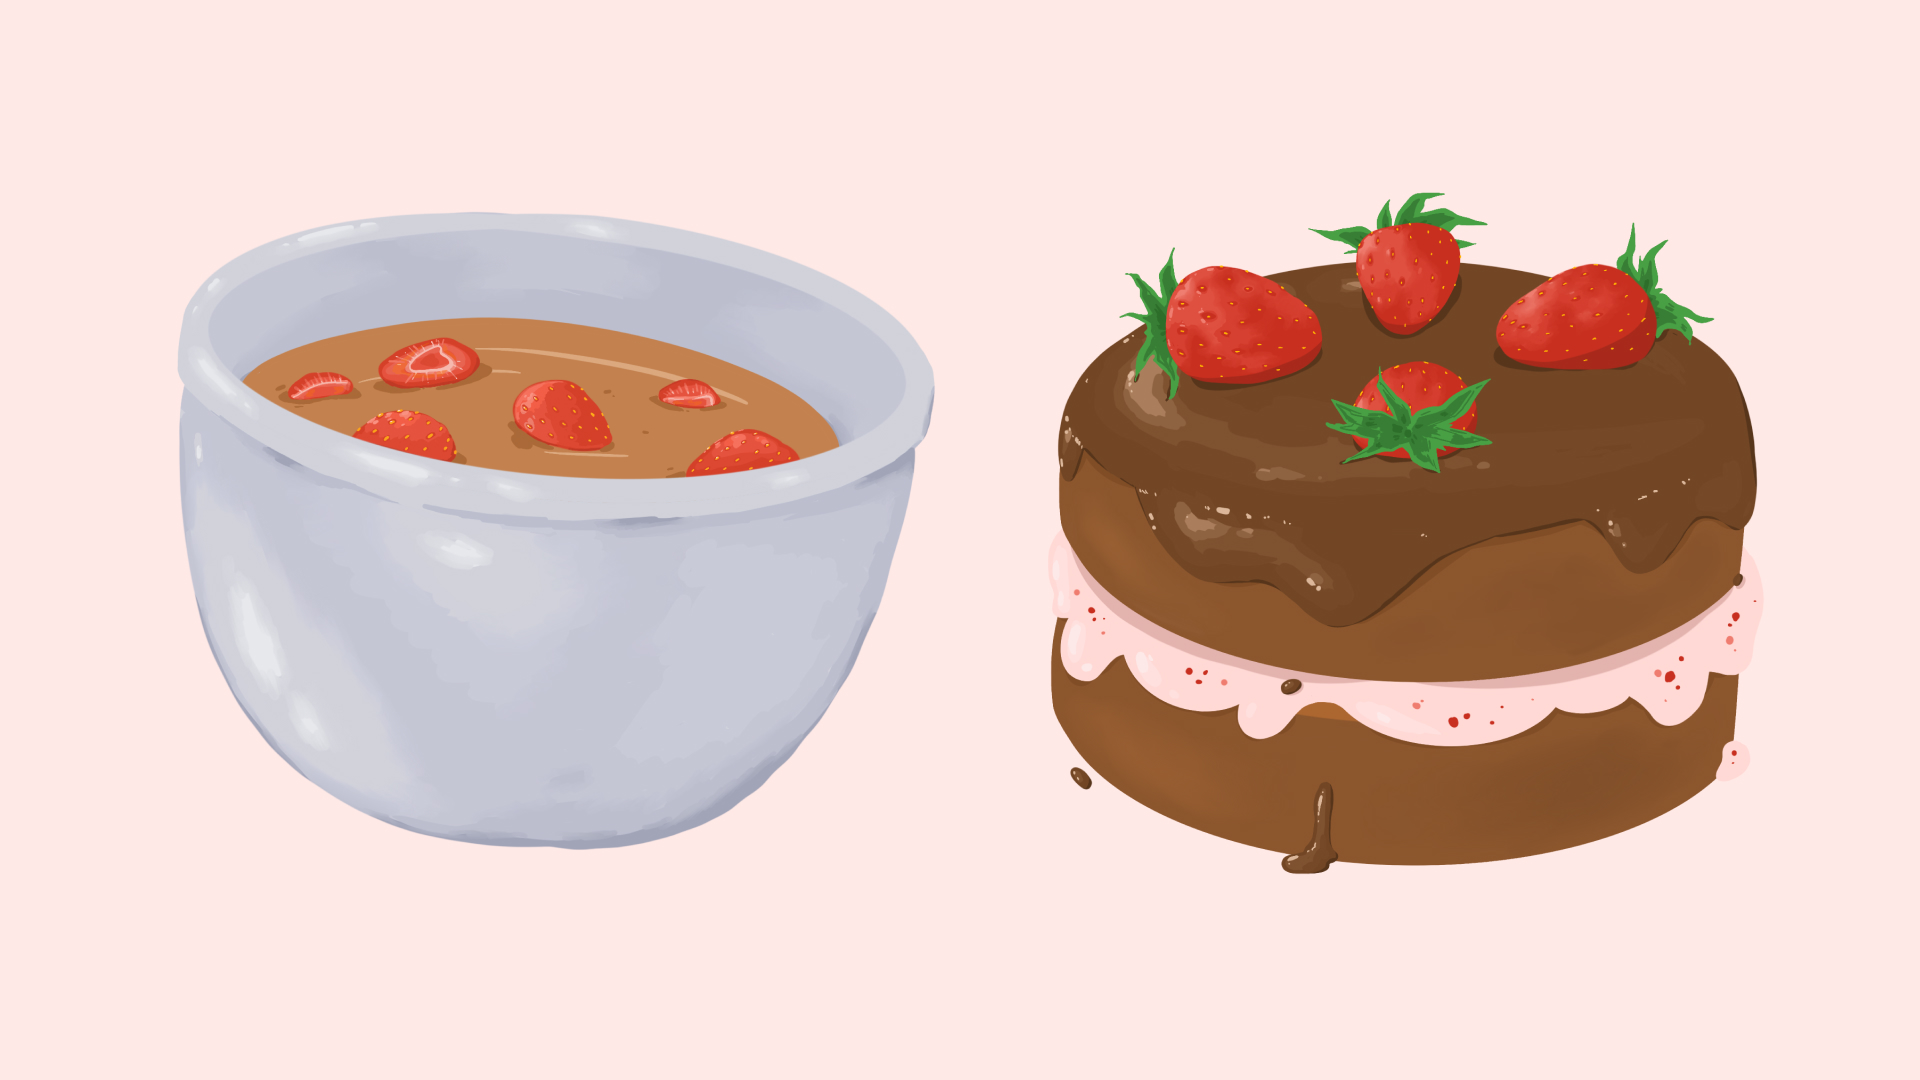 different stages of a cake with strawberries in it being baked (bowl of batter, in the oven, baked and decorated, etc.)